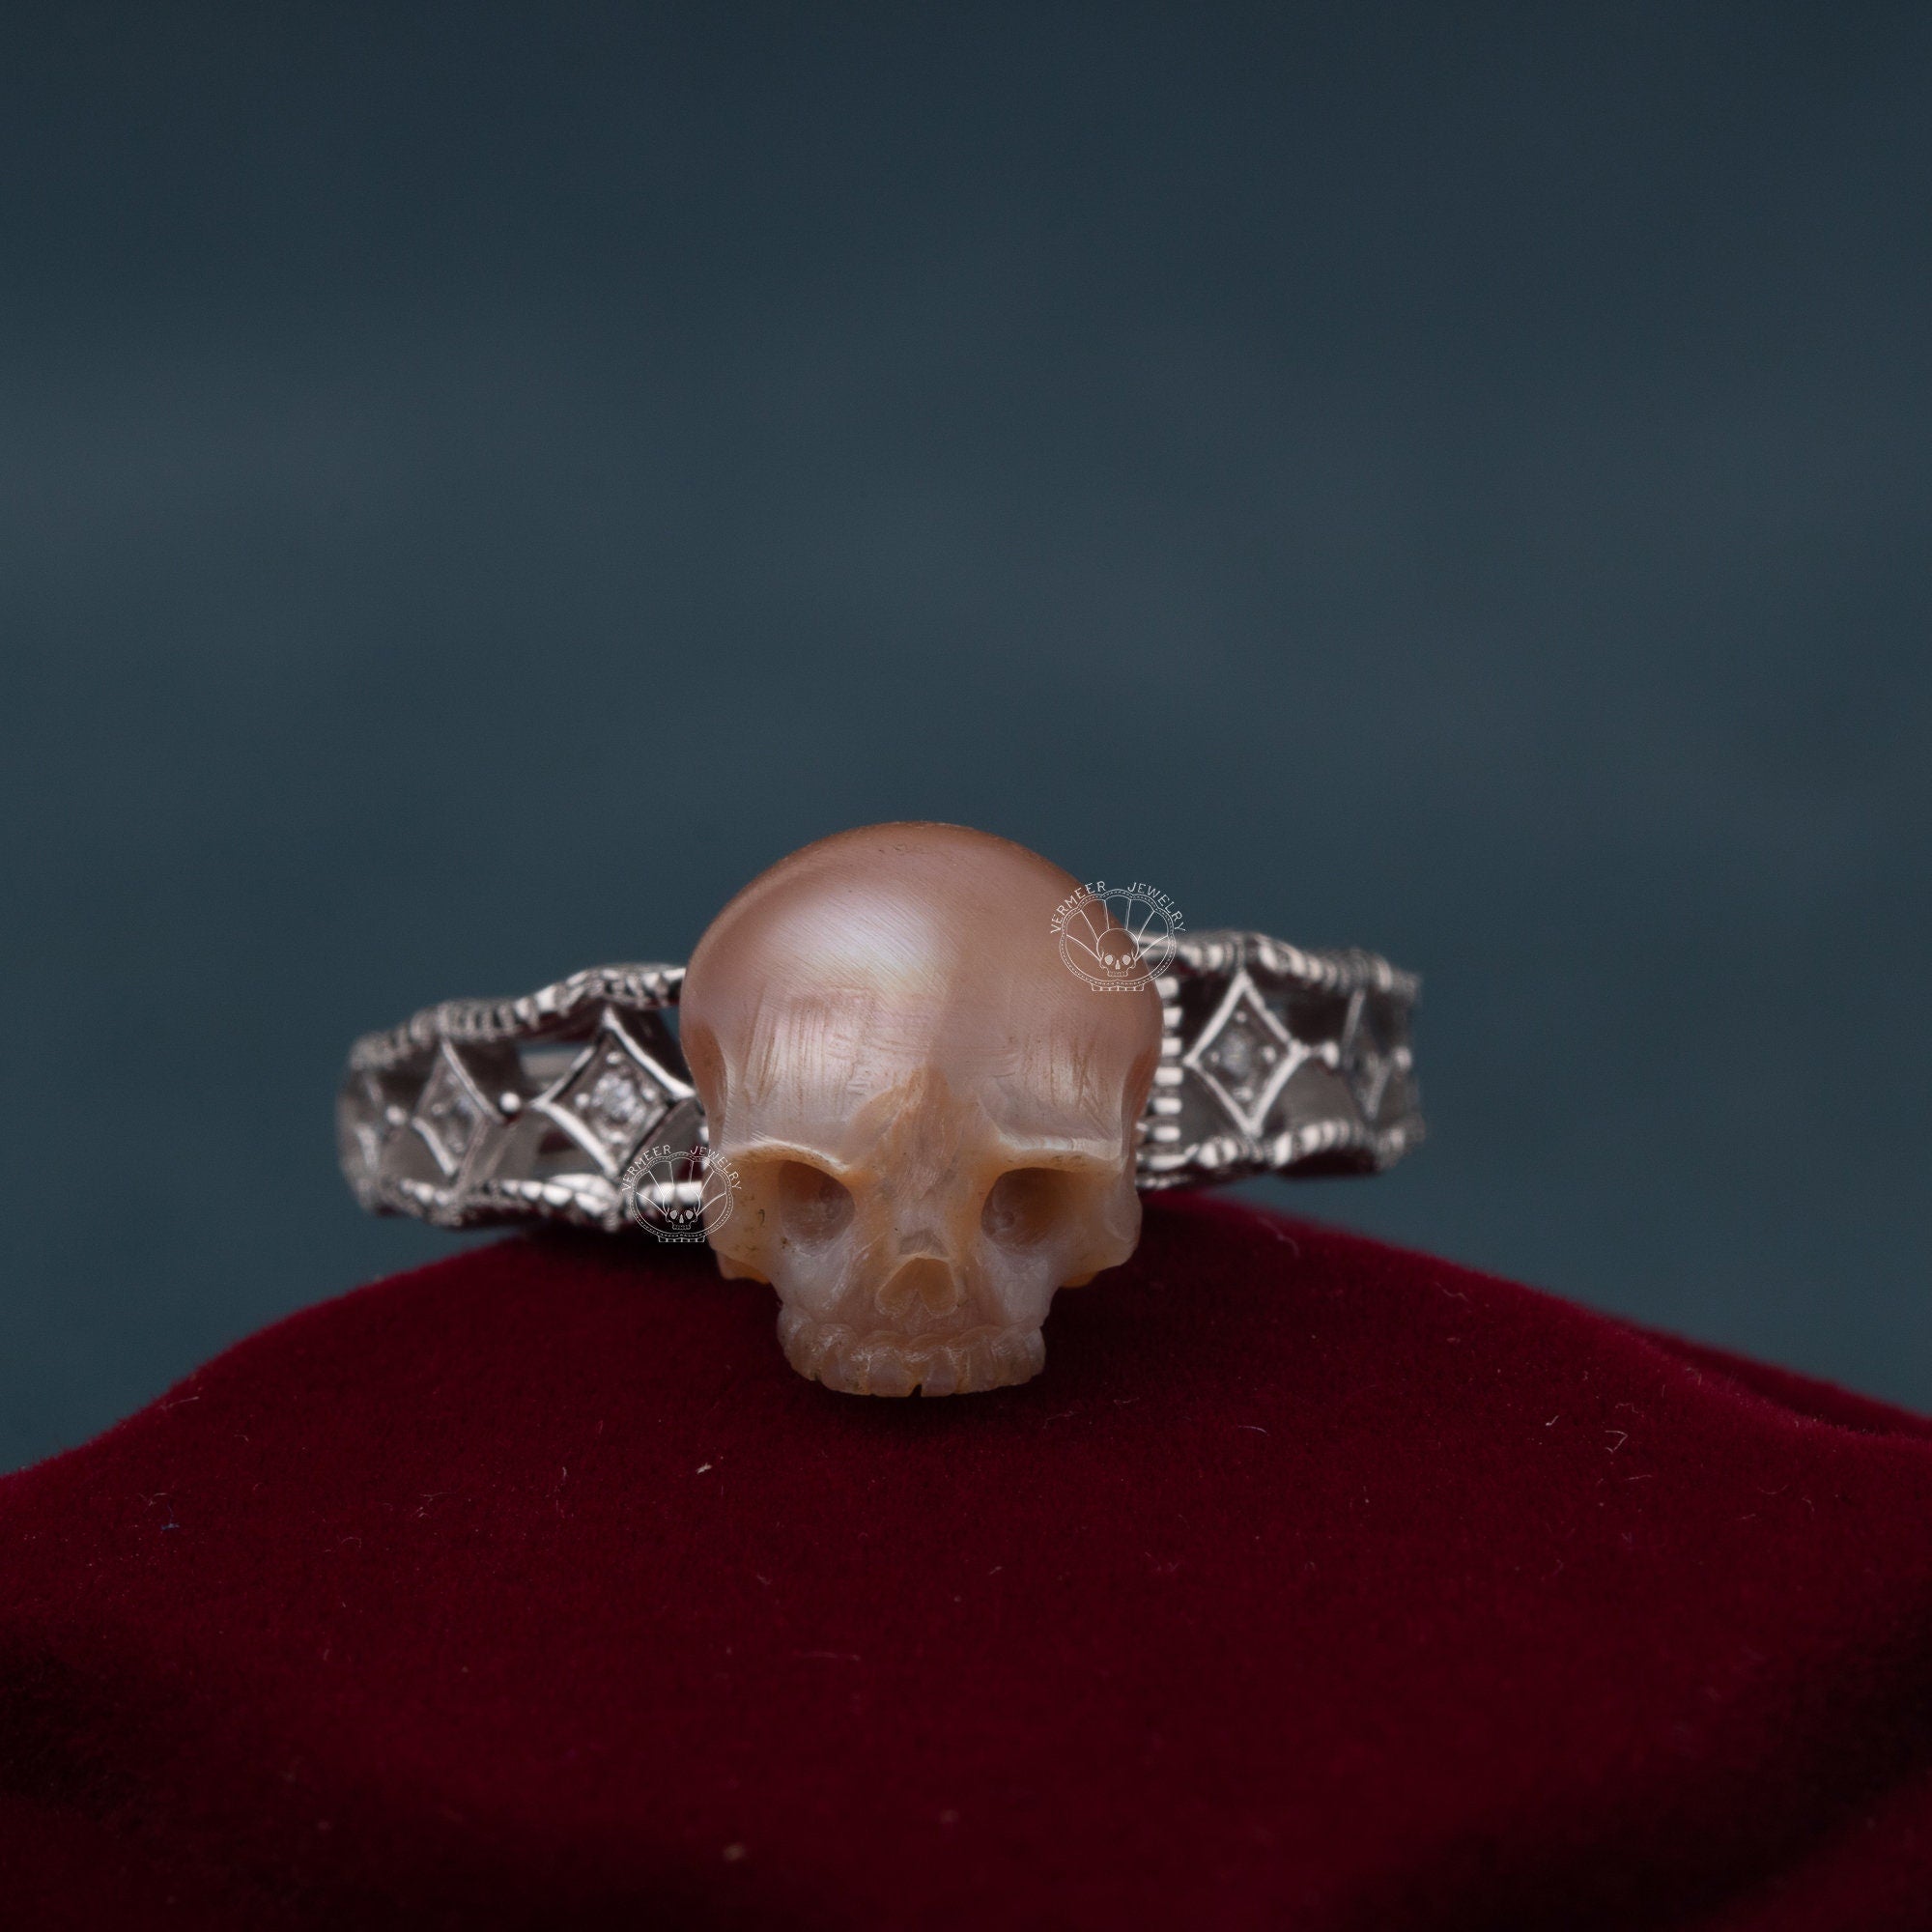 Faith Ring 925 silver natural freshwater pearl carved skull ring